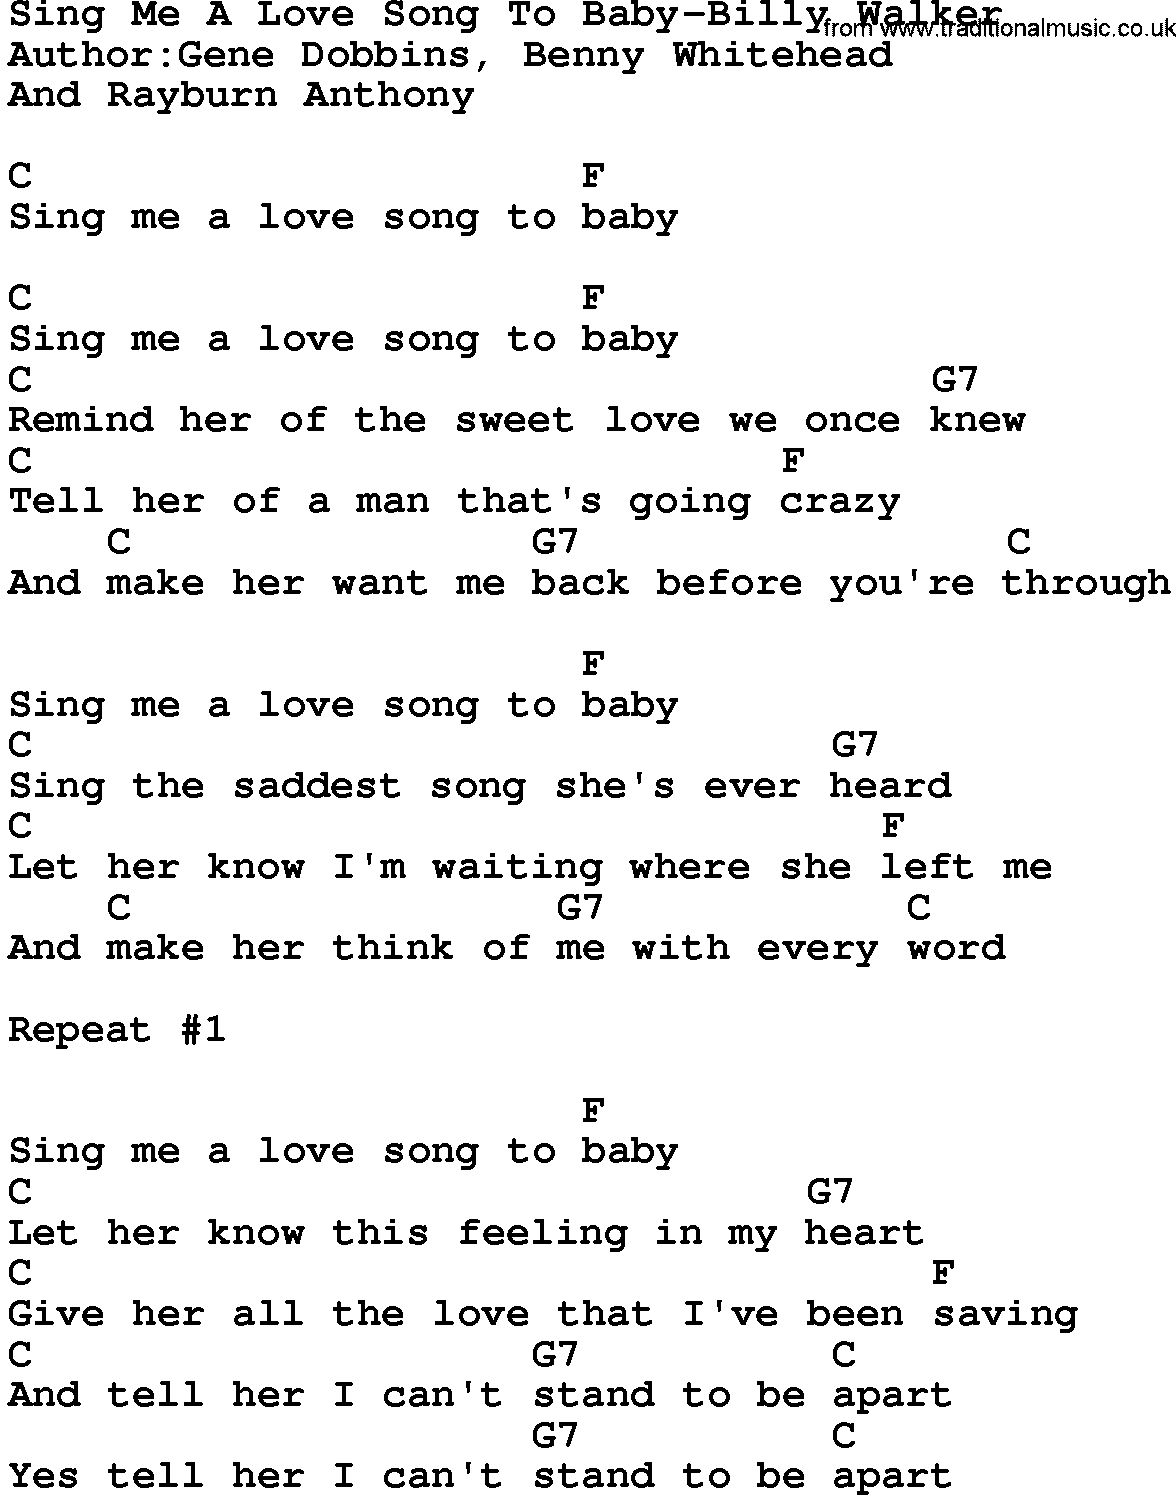 Country music song: Sing Me A Love Song To Baby-Billy Walker lyrics and chords